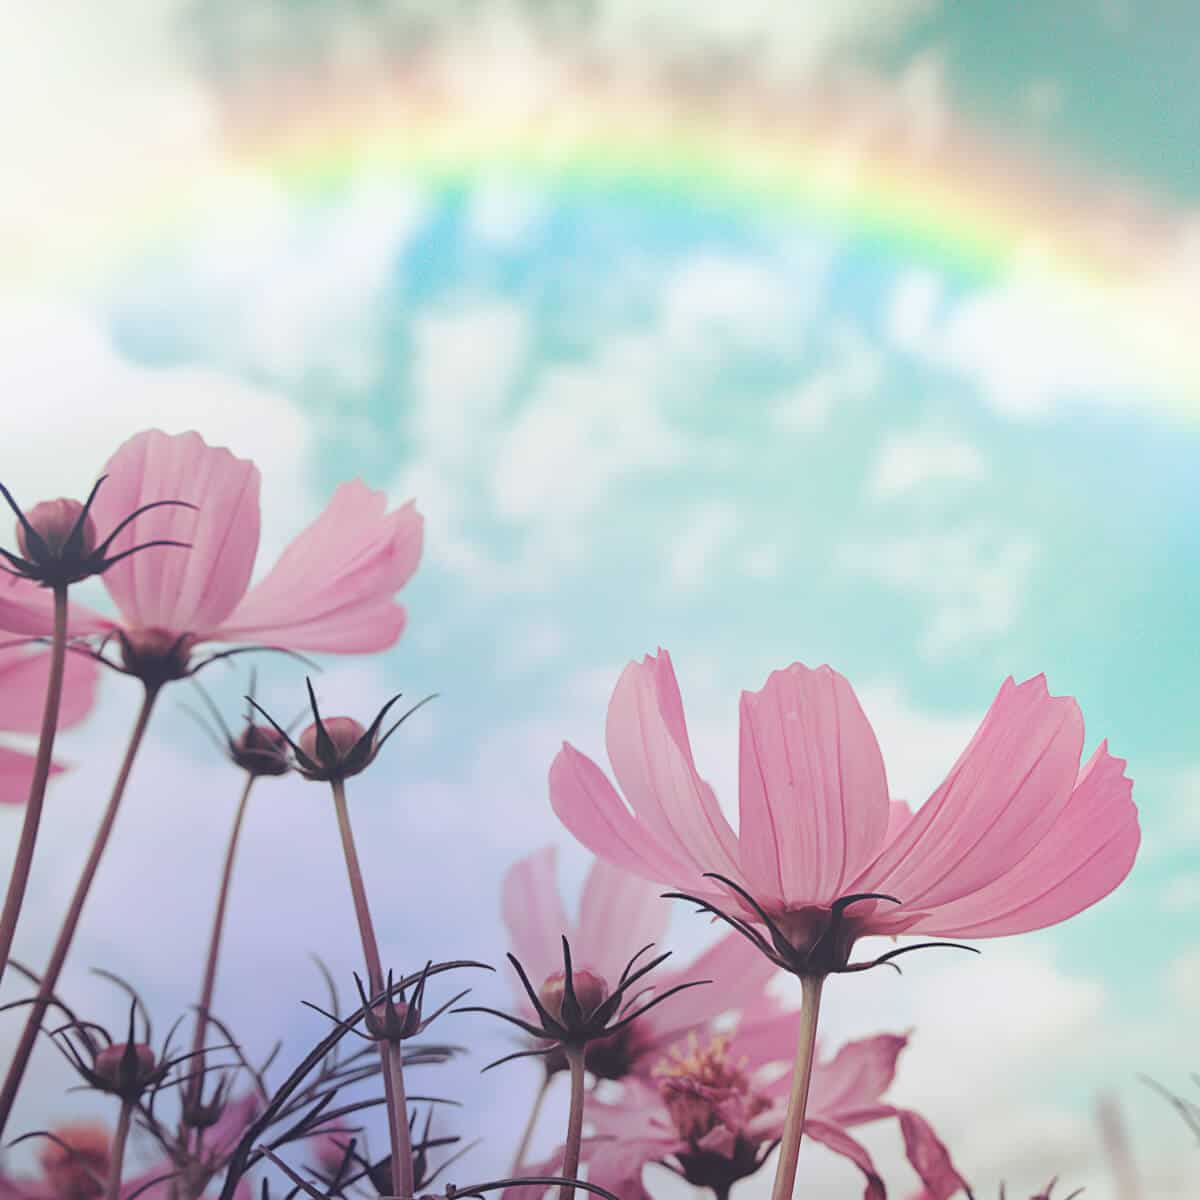 image of flowers reaching for a rainbow